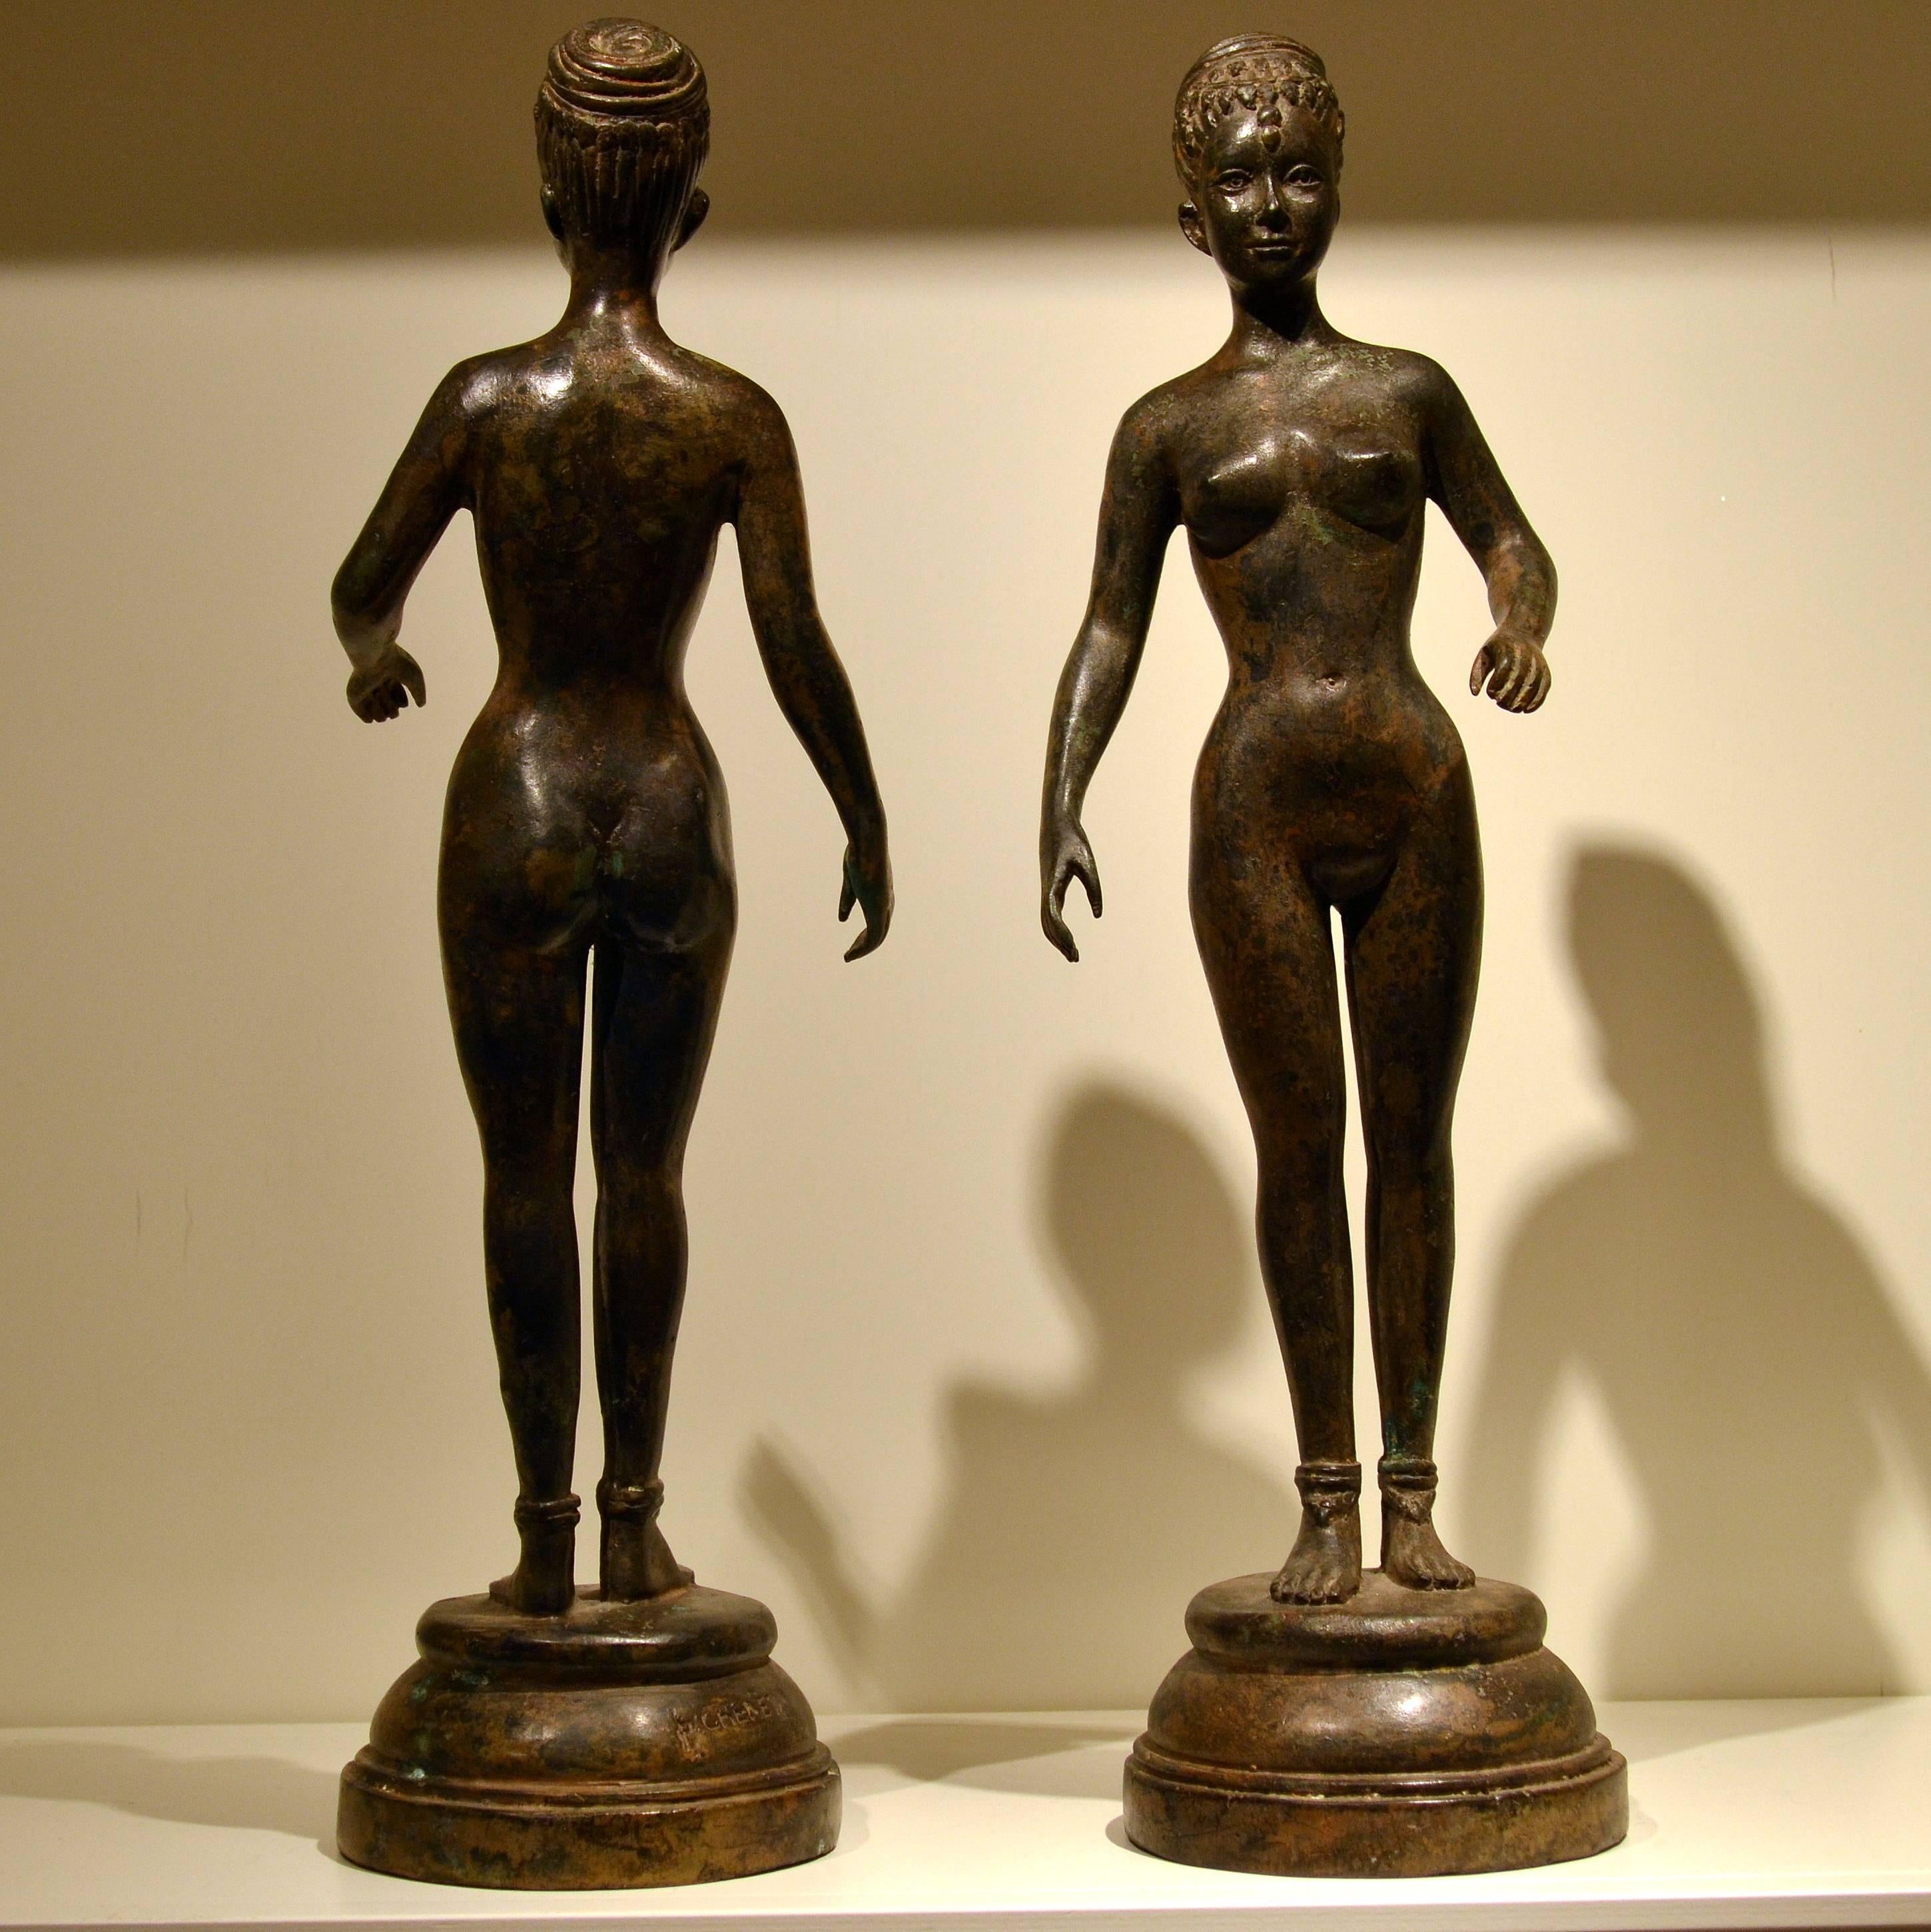 Pierre Chenet was a celebrated Art Deco sculptor in Paris during the early twentieth century.  This pair of Art Deco bronze nude female statues is characteristic of Chenet’s exploration of contemporary Western figures combined with primitive